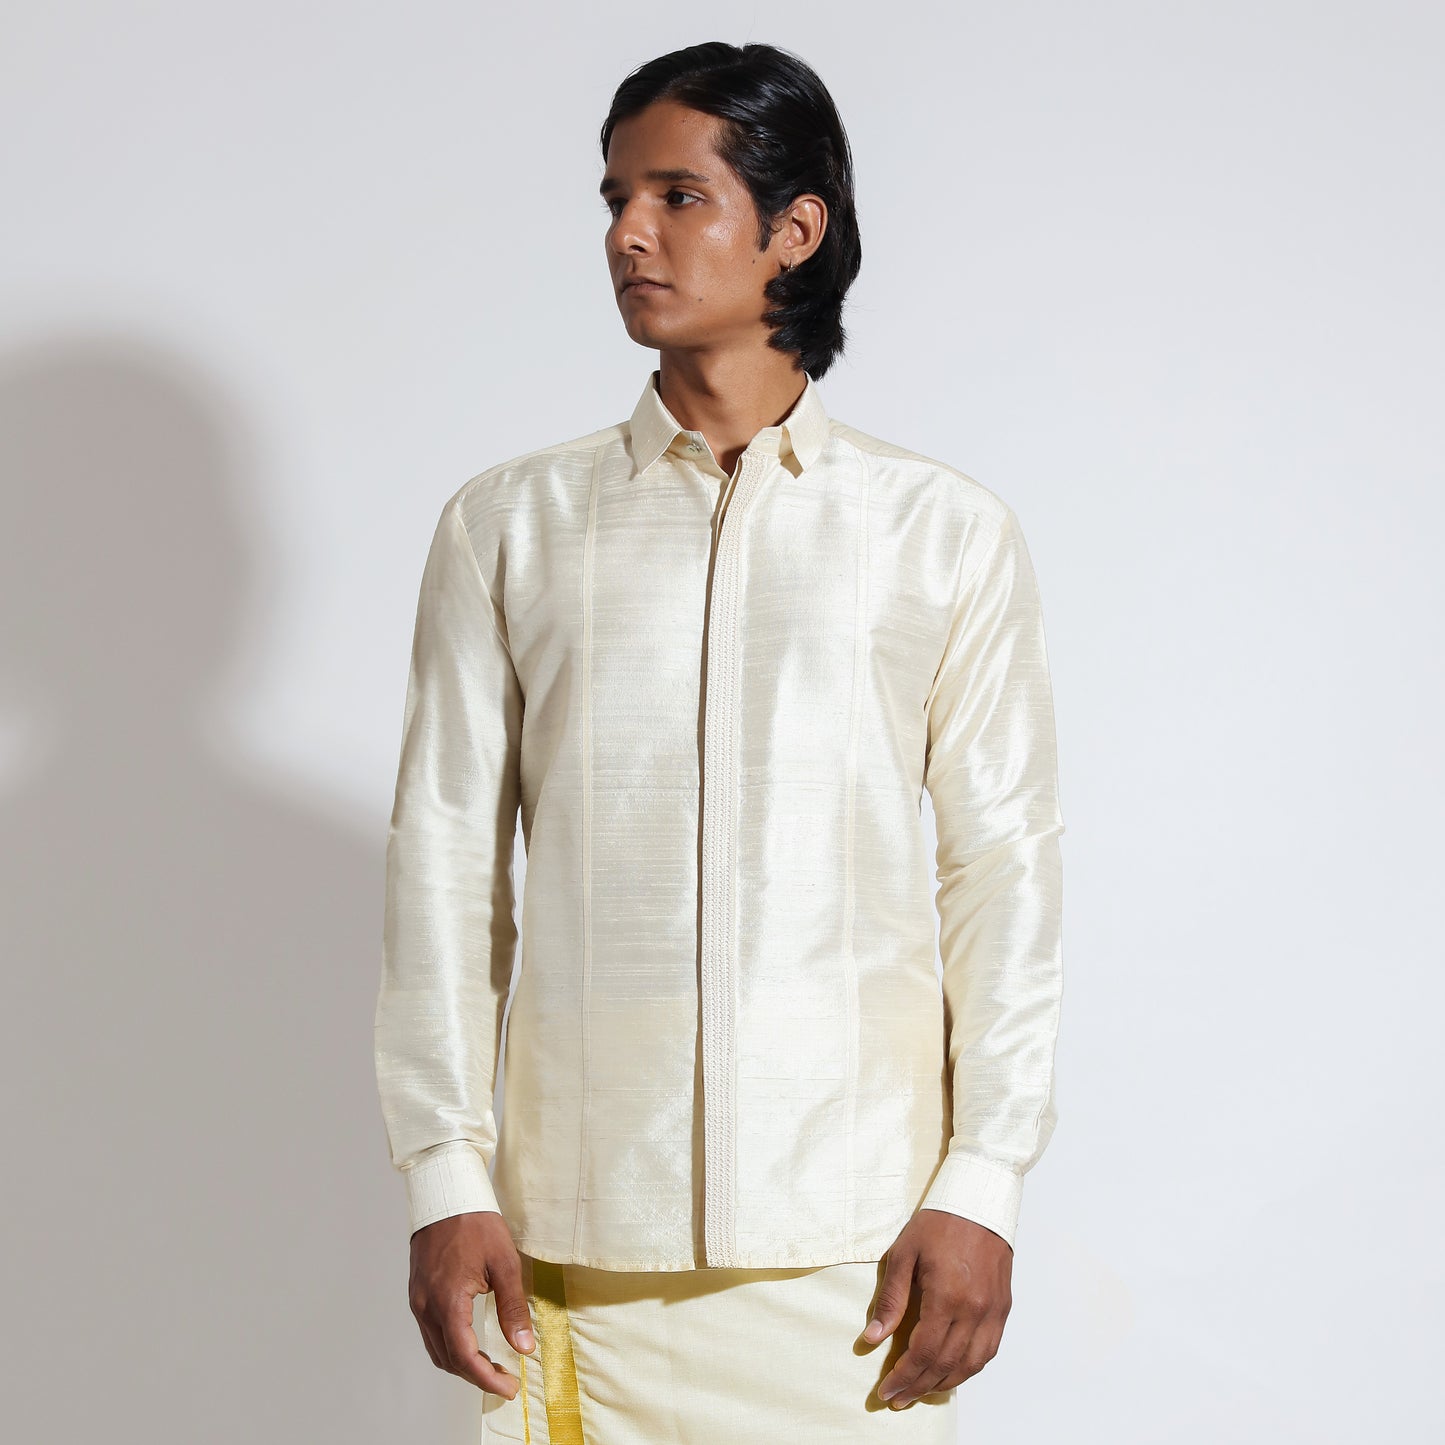 Long sleeve shirt with embroidery detail on concealed placket